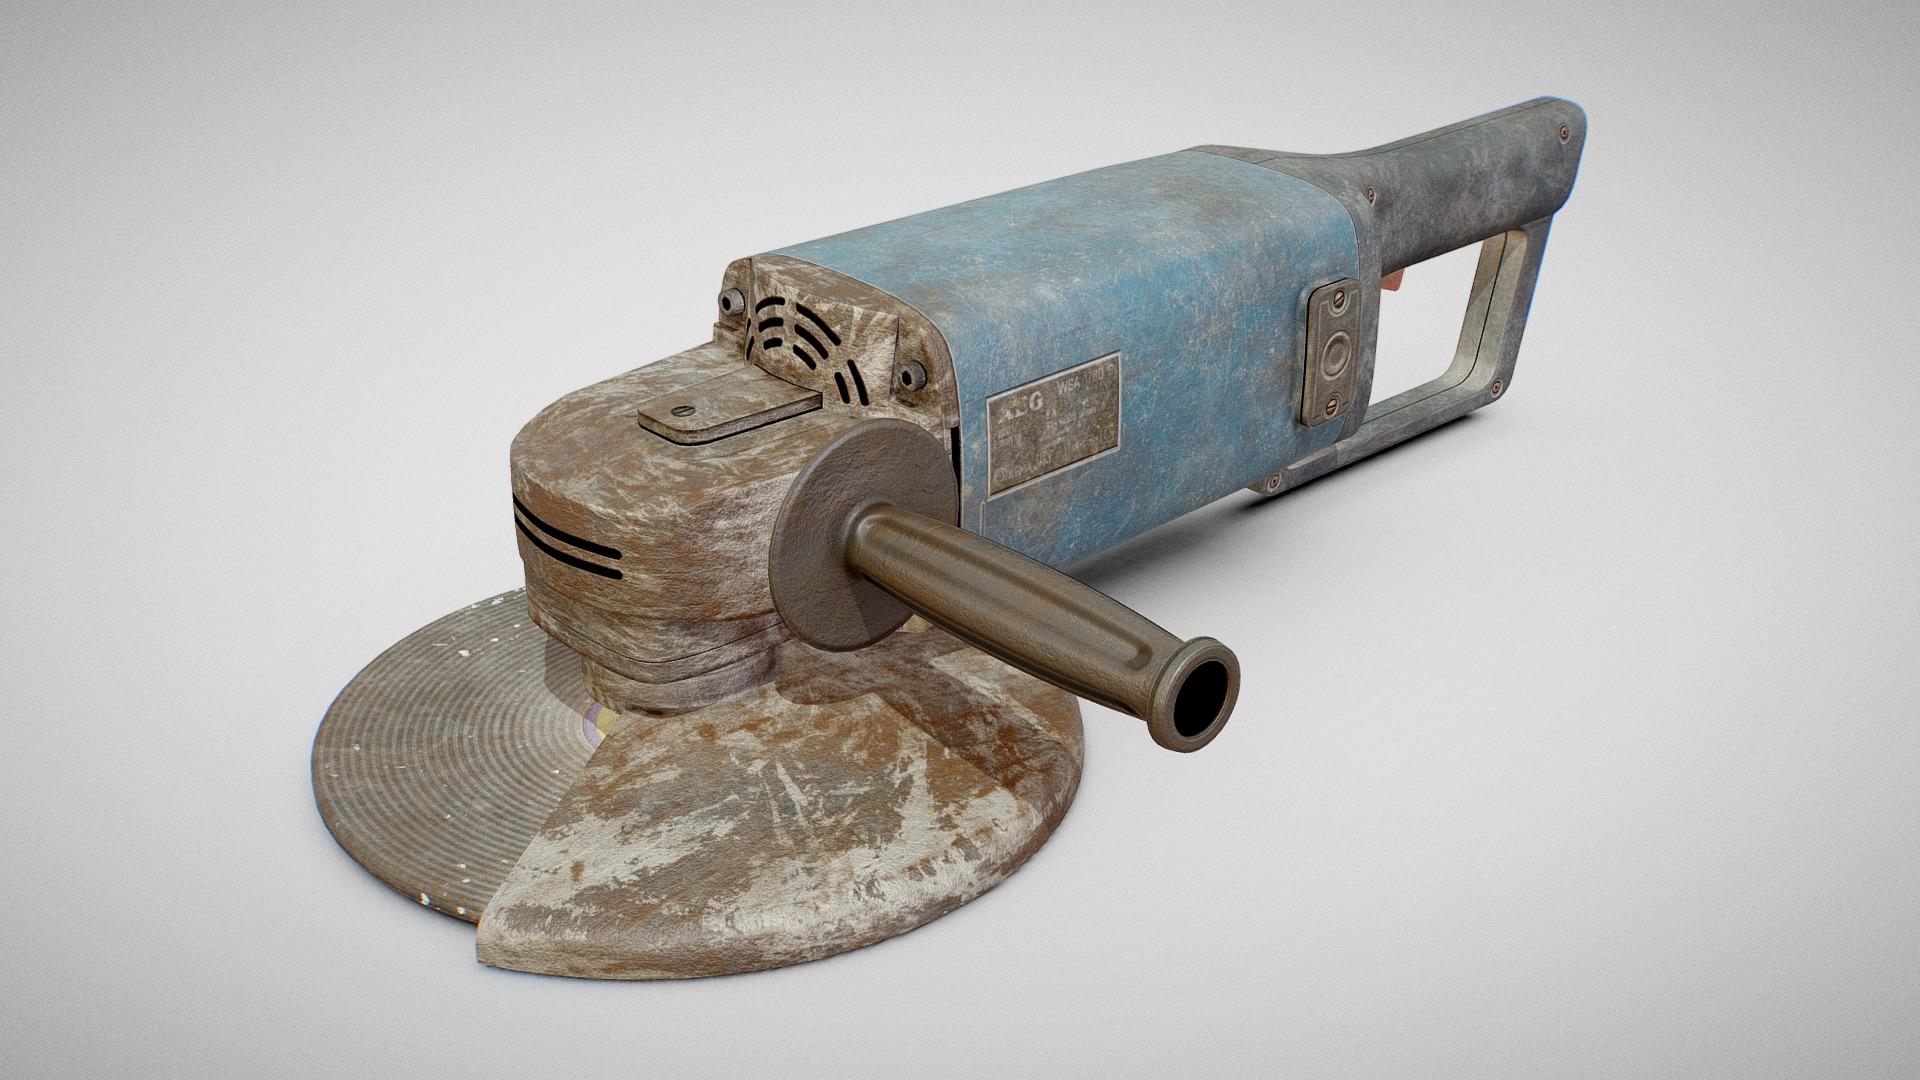 3D model Angle Grinder – AEG WSA 1780S (Dirty) - This is a 3D model of the Angle Grinder - AEG WSA 1780S (Dirty). The 3D model is about a metal object with a handle.